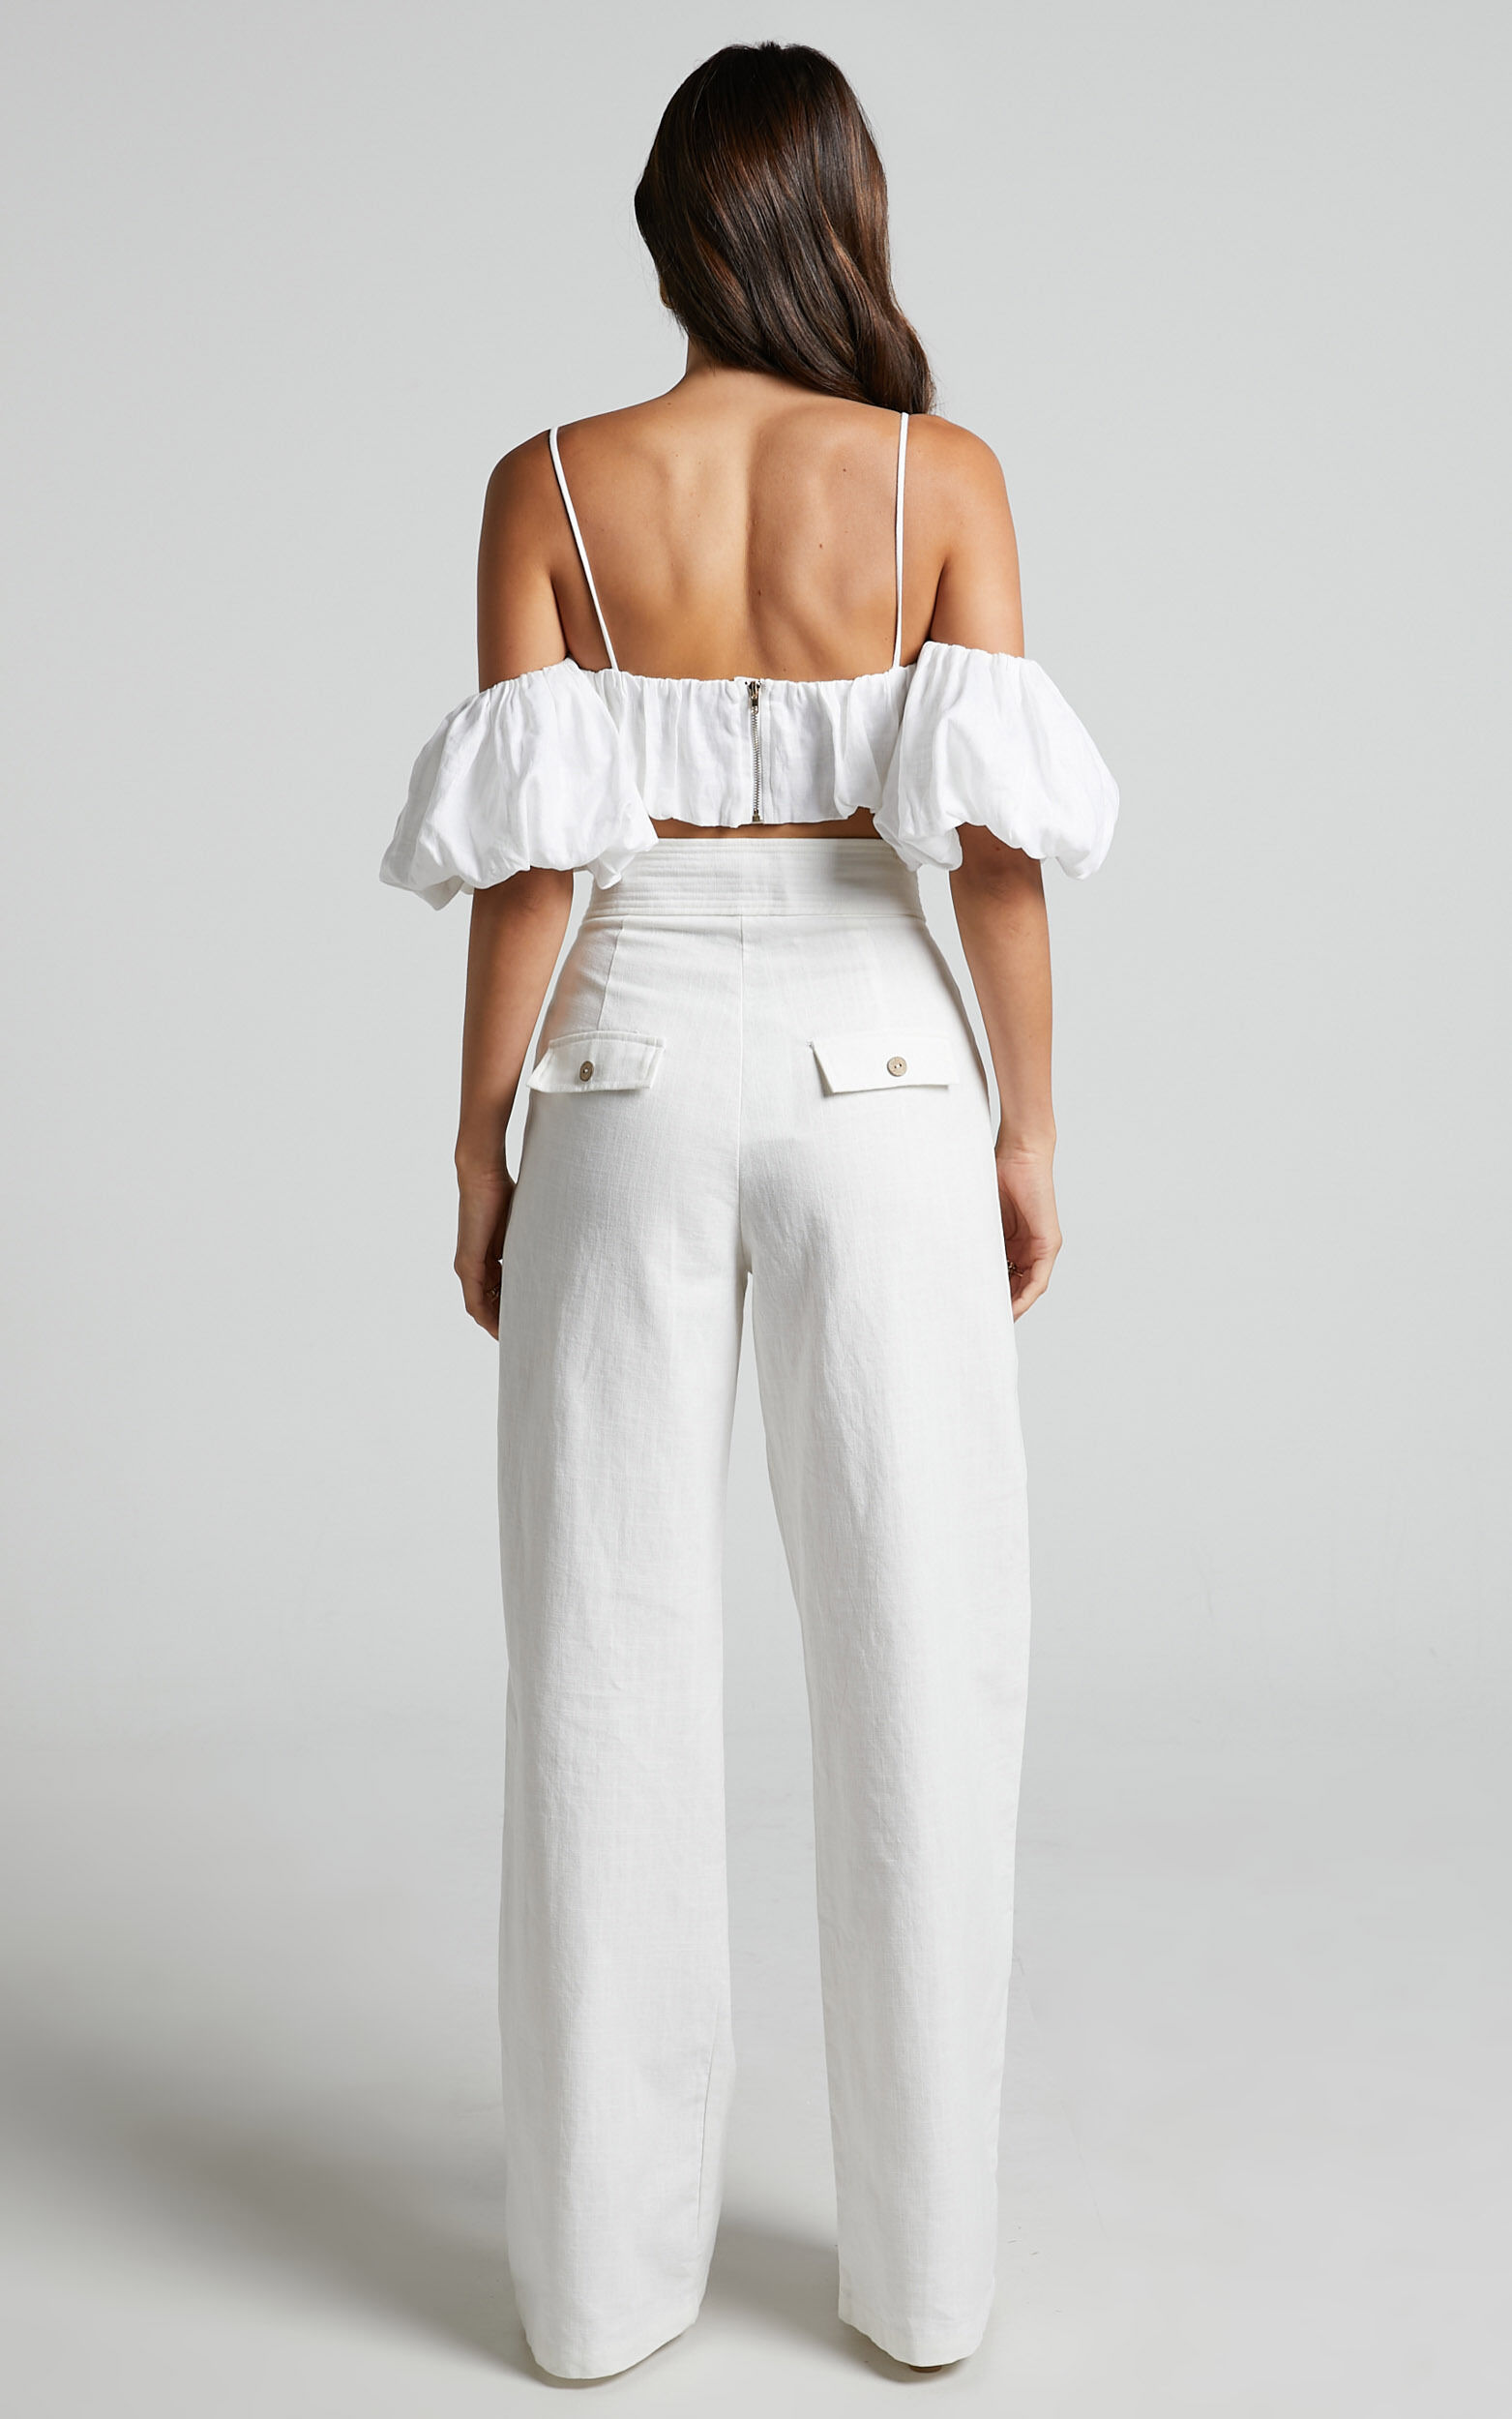 Amalie The Label - Charo High Waisted Wide Leg Pants in Warm White